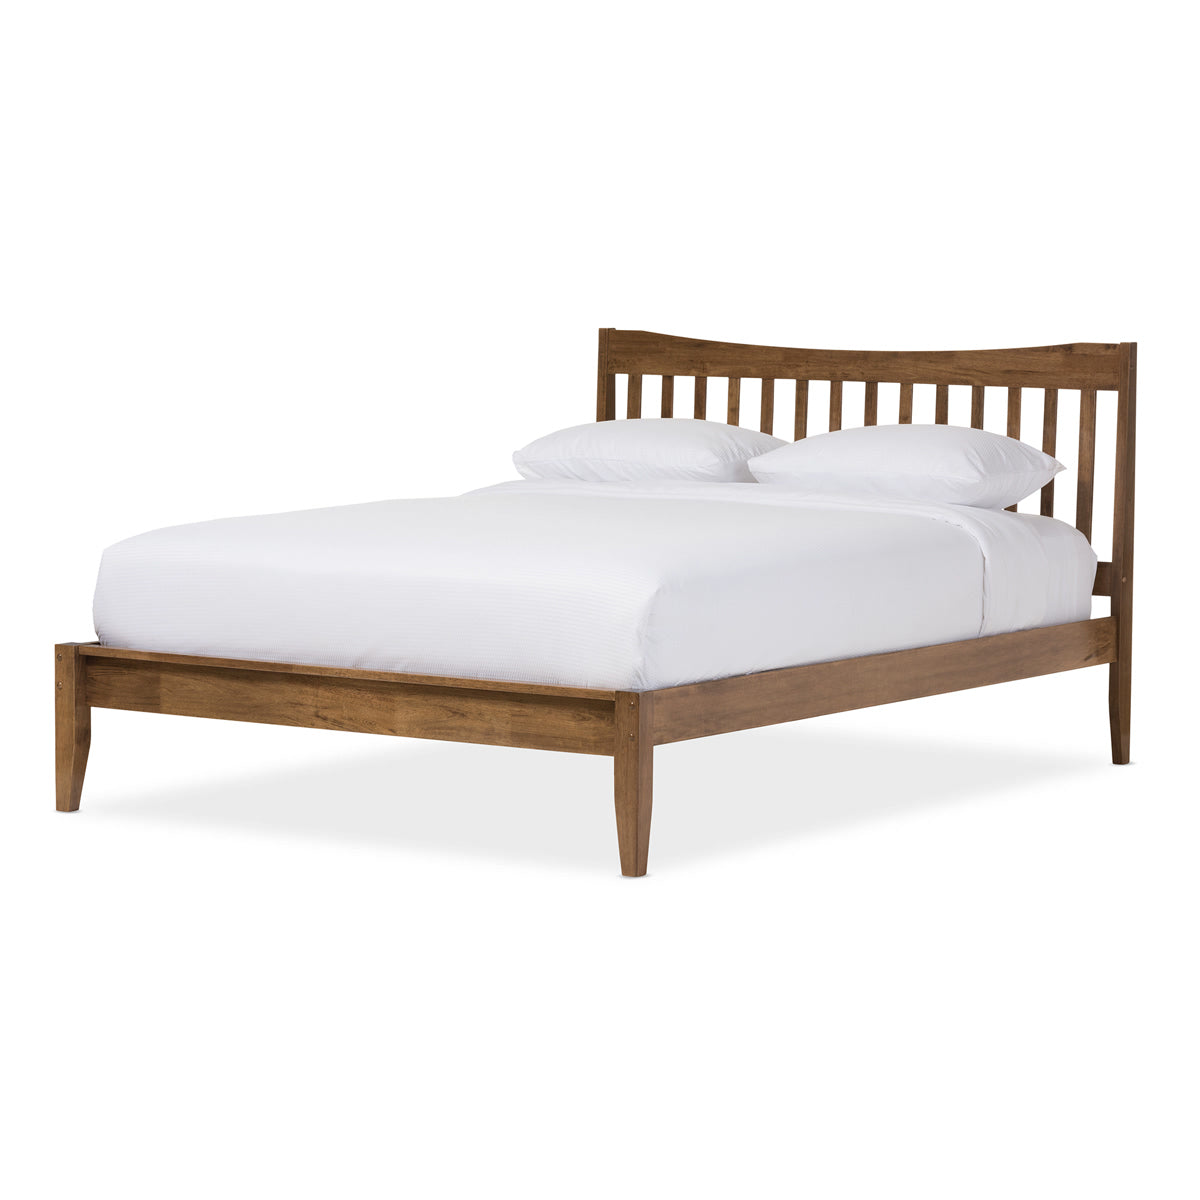 Baxton Studio Edeline Mid-Century Modern Solid Walnut Wood Curvaceous Slatted Queen Size Platform Bed  Baxton Studio-Queen Bed-Minimal And Modern - 2